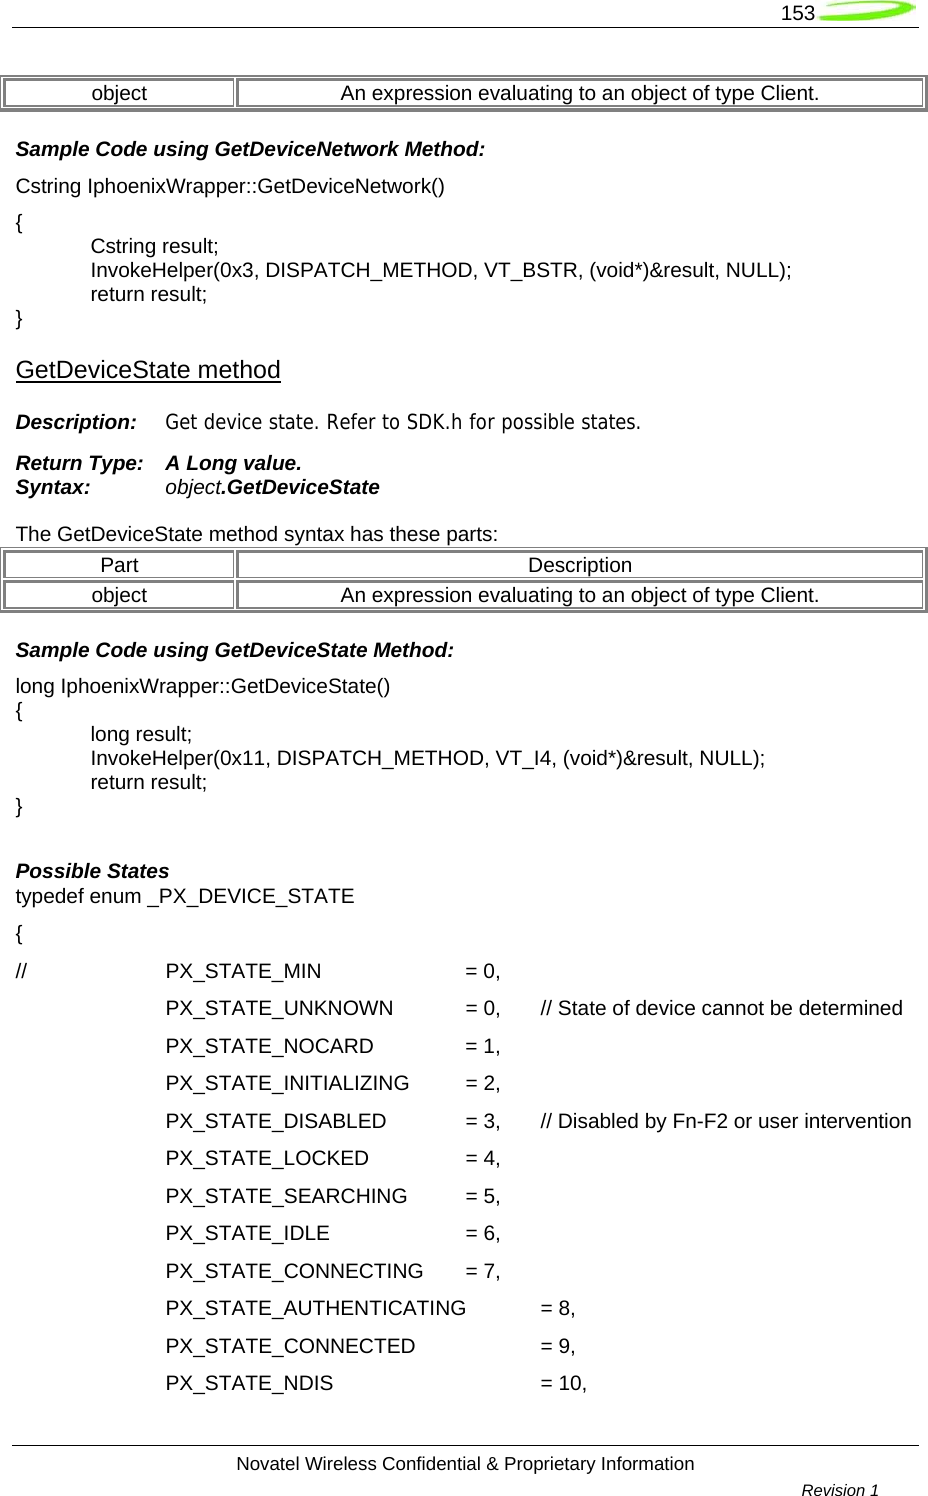   153  Novatel Wireless Confidential &amp; Proprietary Information        Revision 1   object  An expression evaluating to an object of type Client. Sample Code using GetDeviceNetwork Method: Cstring IphoenixWrapper::GetDeviceNetwork() {  Cstring result;  InvokeHelper(0x3, DISPATCH_METHOD, VT_BSTR, (void*)&amp;result, NULL);  return result; } GetDeviceState method Description:  Get device state. Refer to SDK.h for possible states. Return Type:  A Long value. Syntax:  object.GetDeviceState  The GetDeviceState method syntax has these parts: Part Description object  An expression evaluating to an object of type Client. Sample Code using GetDeviceState Method: long IphoenixWrapper::GetDeviceState() {  long result;  InvokeHelper(0x11, DISPATCH_METHOD, VT_I4, (void*)&amp;result, NULL);  return result; }  Possible States typedef enum _PX_DEVICE_STATE { // PX_STATE_MIN  = 0,   PX_STATE_UNKNOWN  = 0,  // State of device cannot be determined  PX_STATE_NOCARD  = 1,   PX_STATE_INITIALIZING  = 2,    PX_STATE_DISABLED   = 3,   // Disabled by Fn-F2 or user intervention  PX_STATE_LOCKED  = 4,  PX_STATE_SEARCHING = 5,  PX_STATE_IDLE  = 6,  PX_STATE_CONNECTING = 7,  PX_STATE_AUTHENTICATING = 8,  PX_STATE_CONNECTED  = 9,   PX_STATE_NDIS   = 10, 